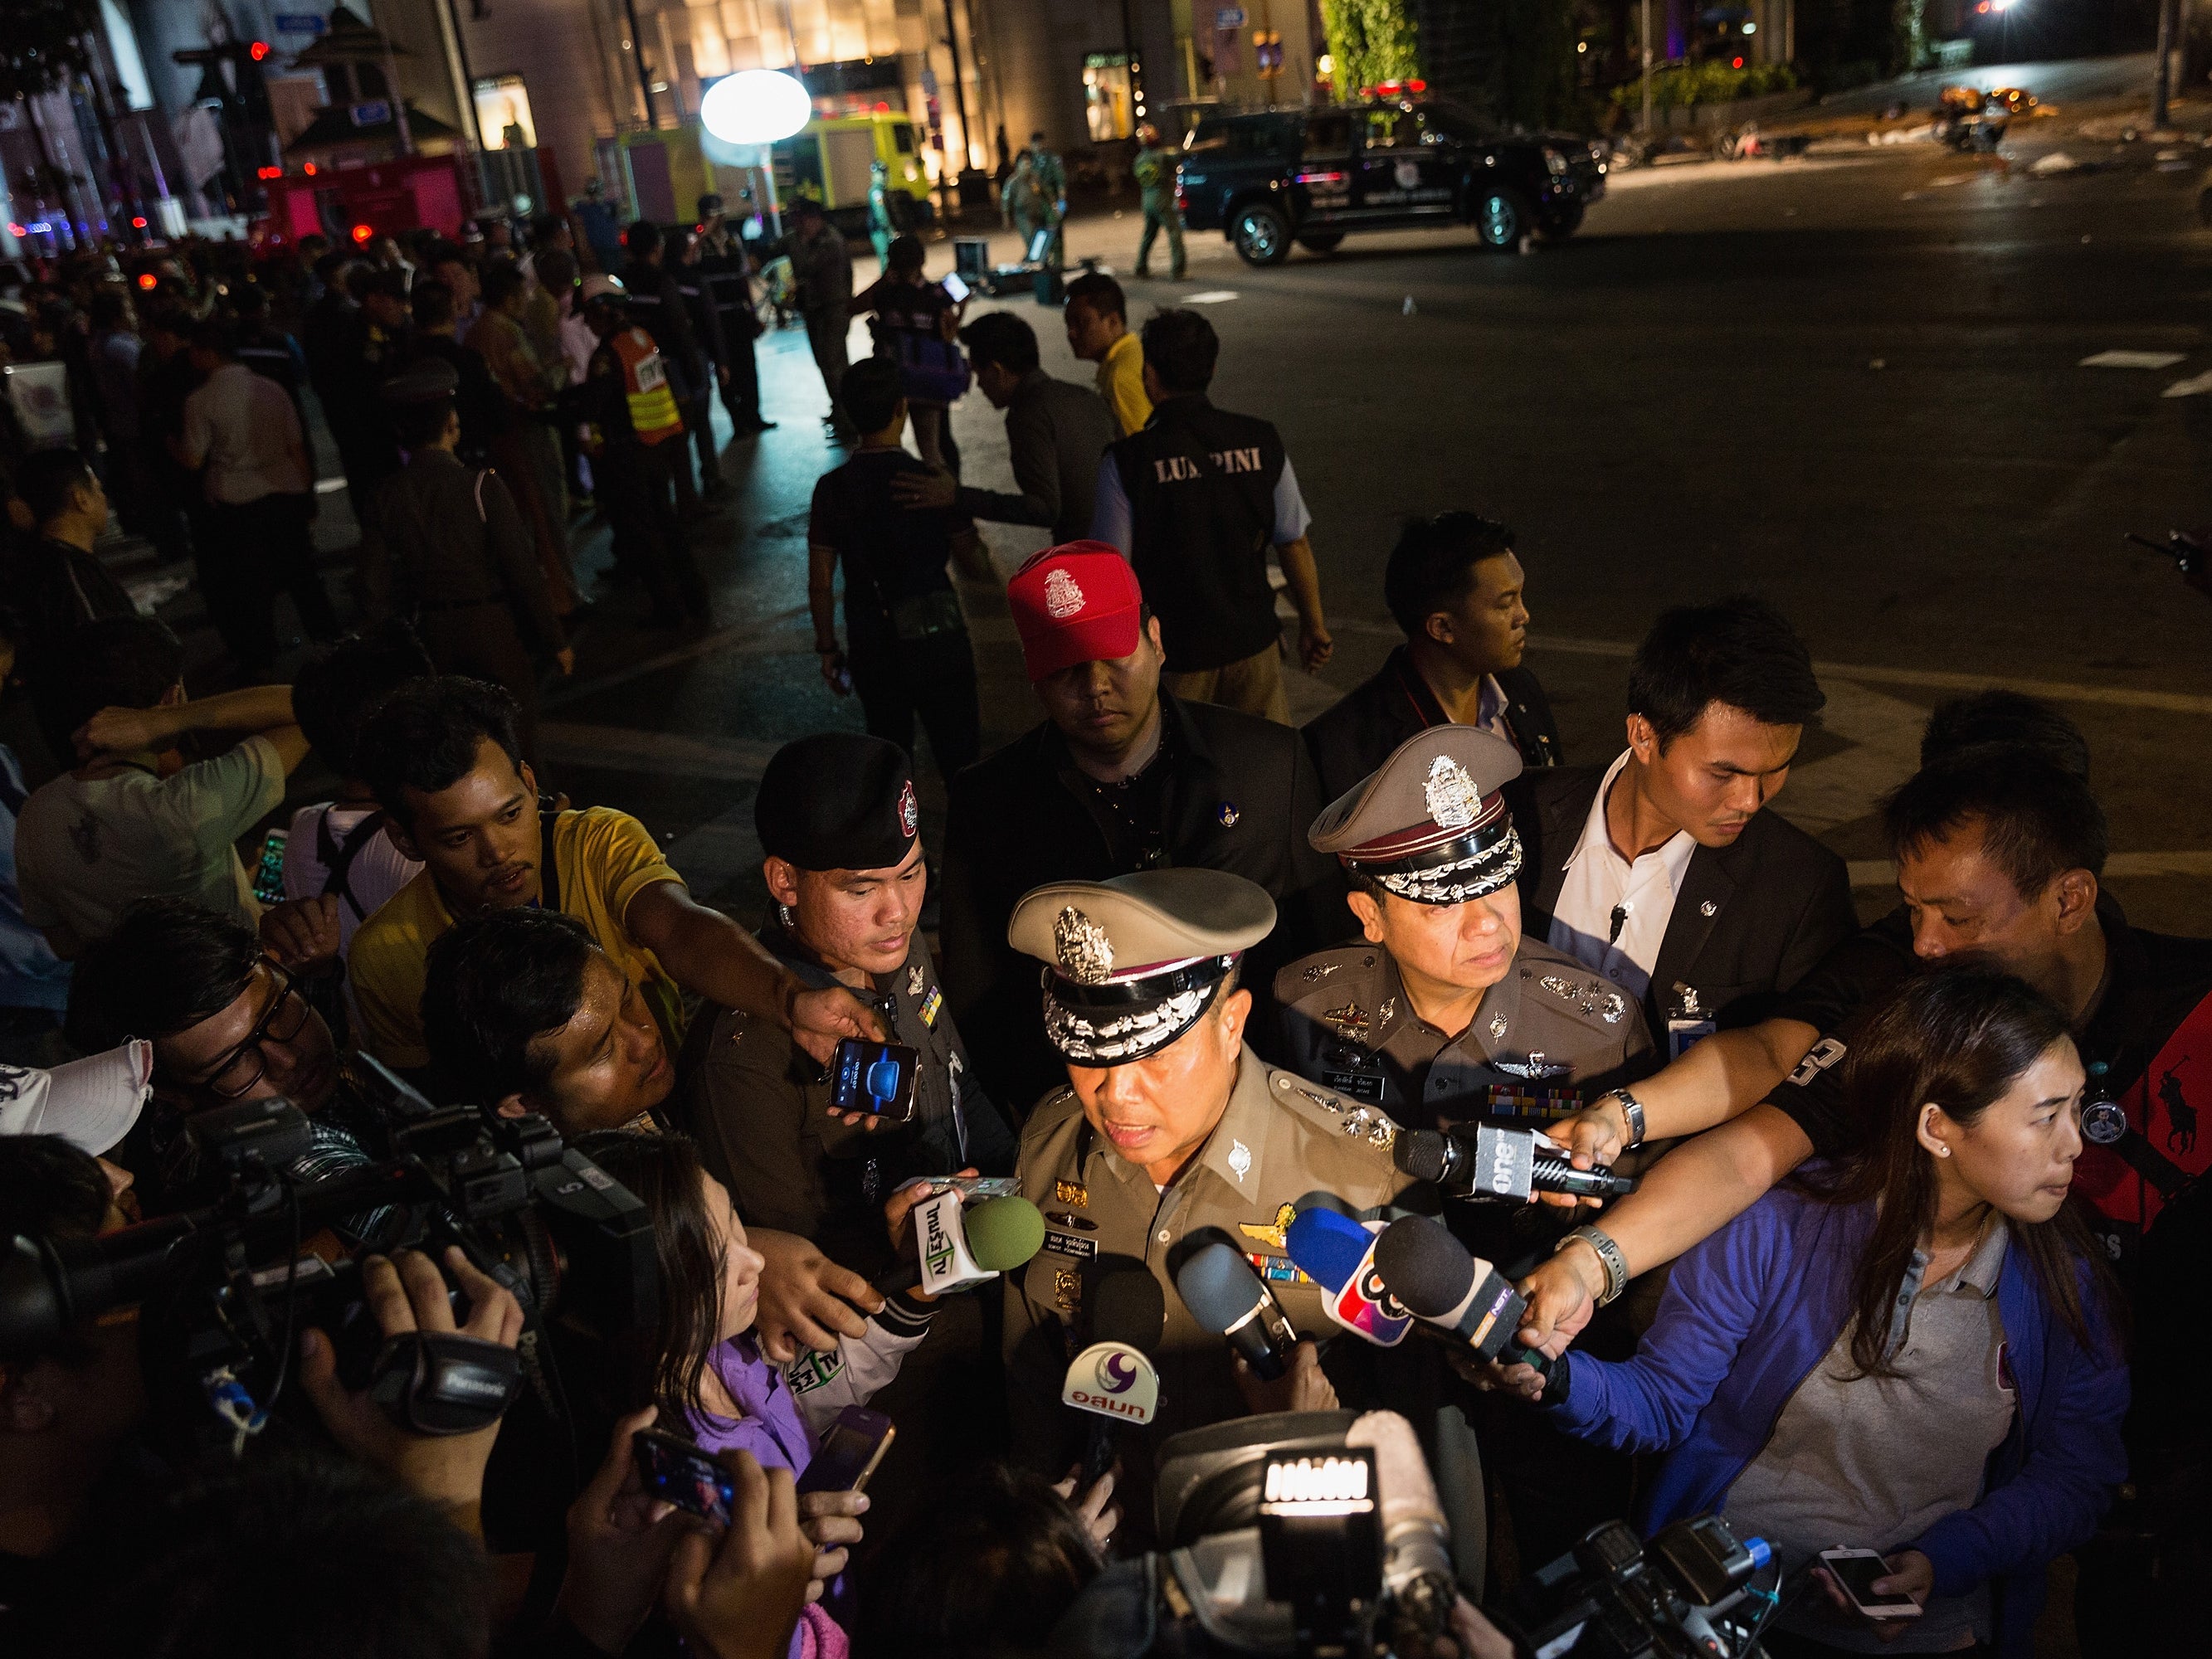 Police chief Somyot Poompanmoung is interviewed by the press (Getty)